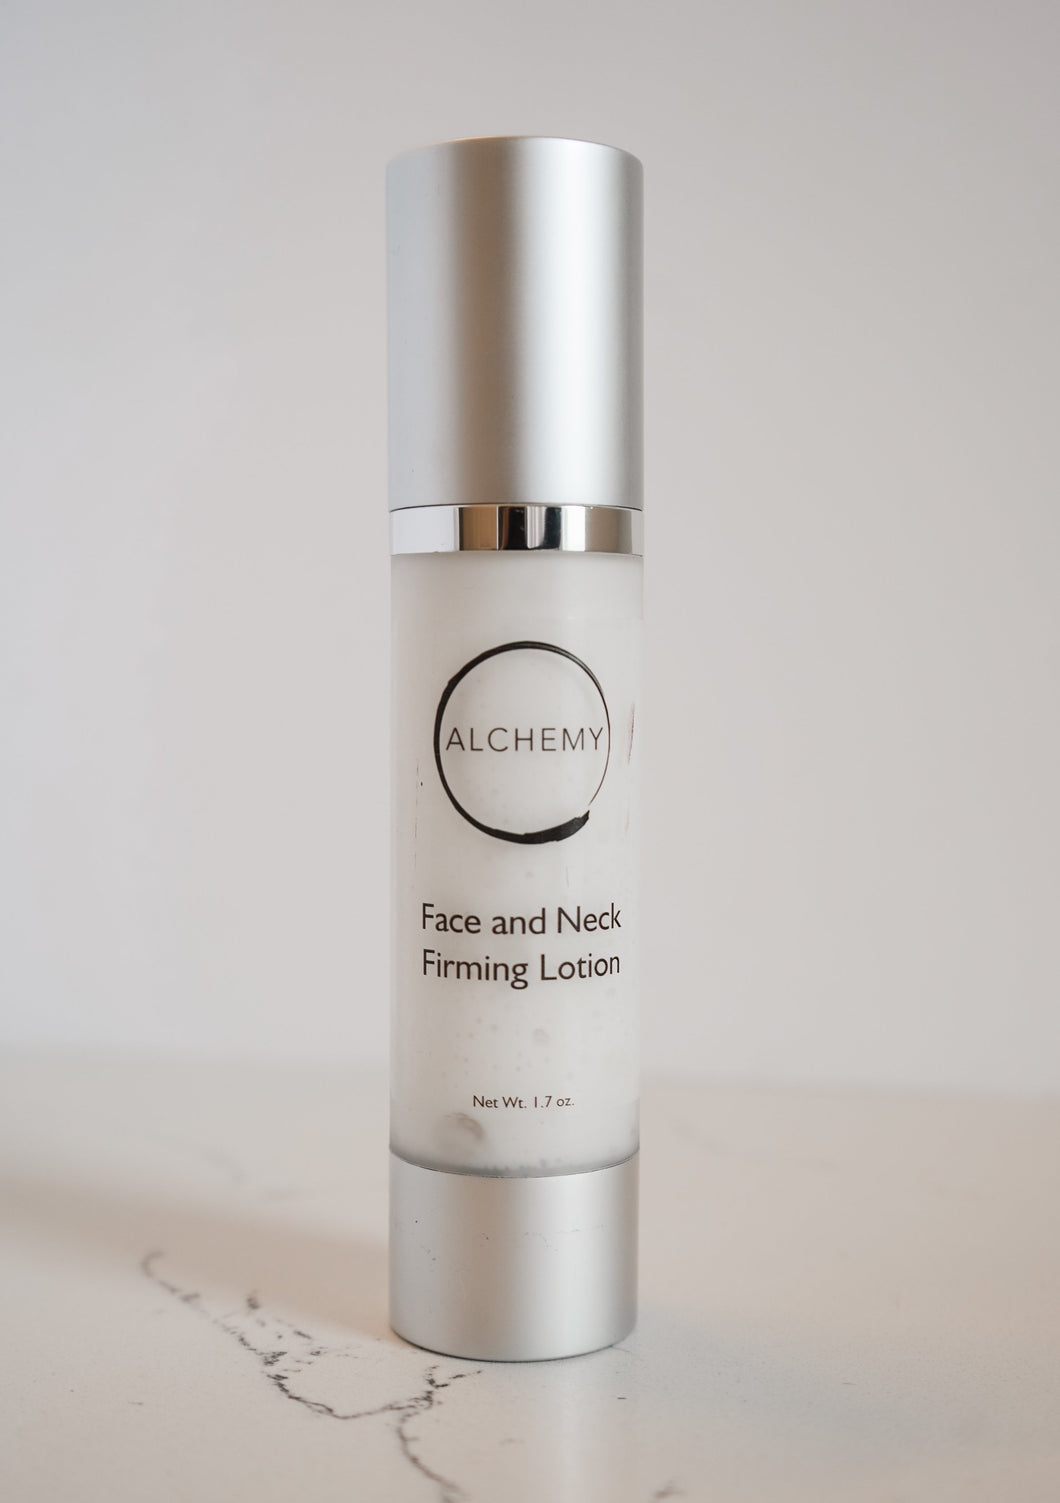 Alchemy Face and Neck Firming Lotion